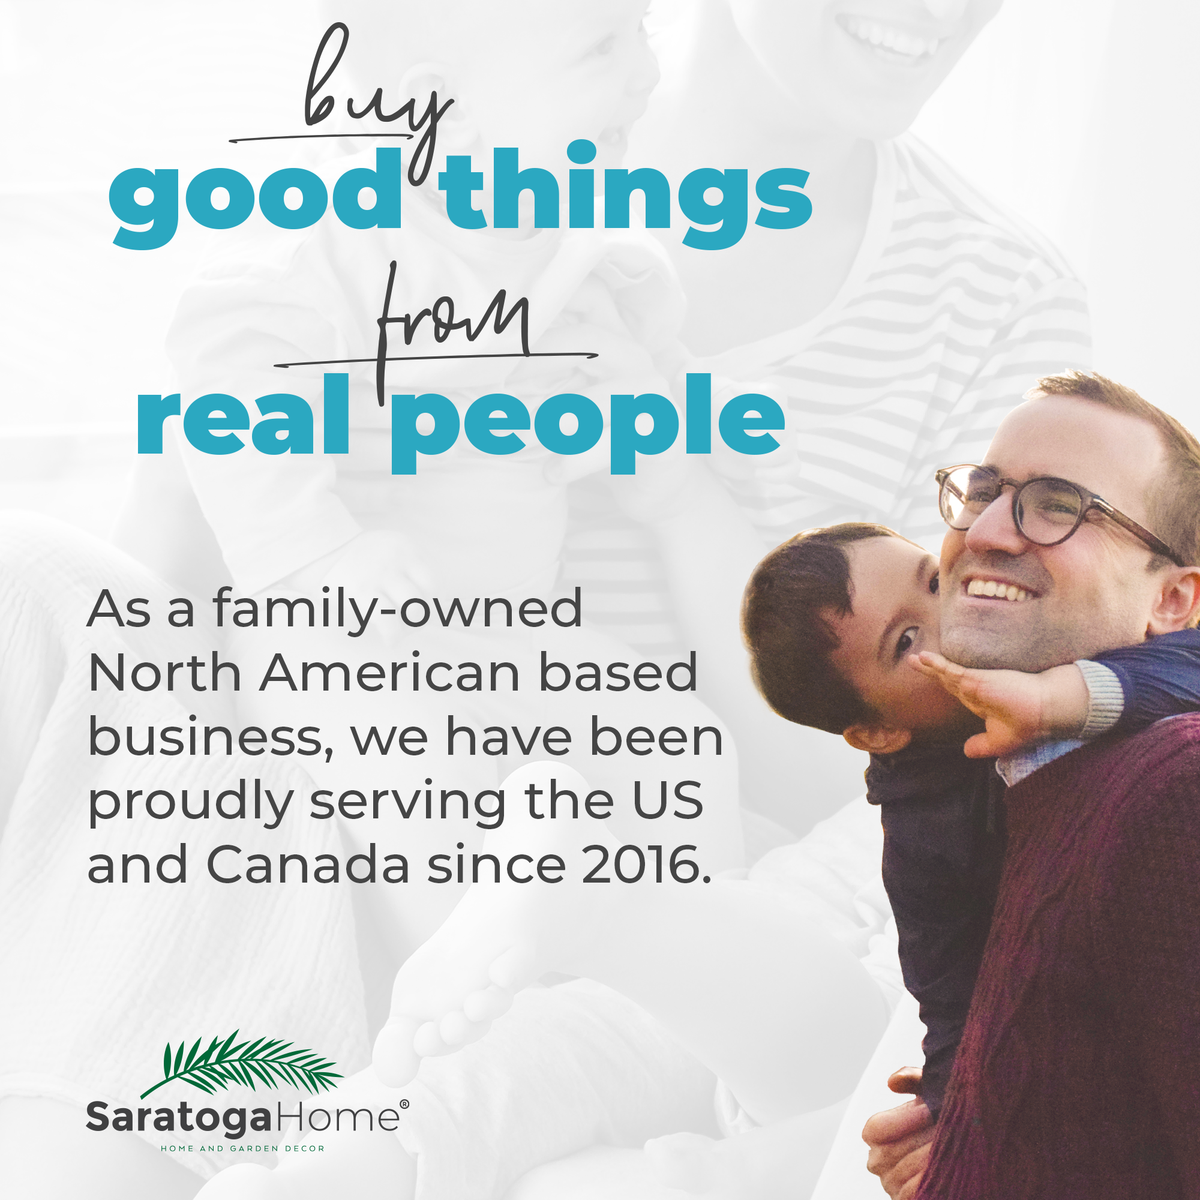 Saratoga Home, as a family-owned North American based business, we have been proudly serving the US and Canada since 2016